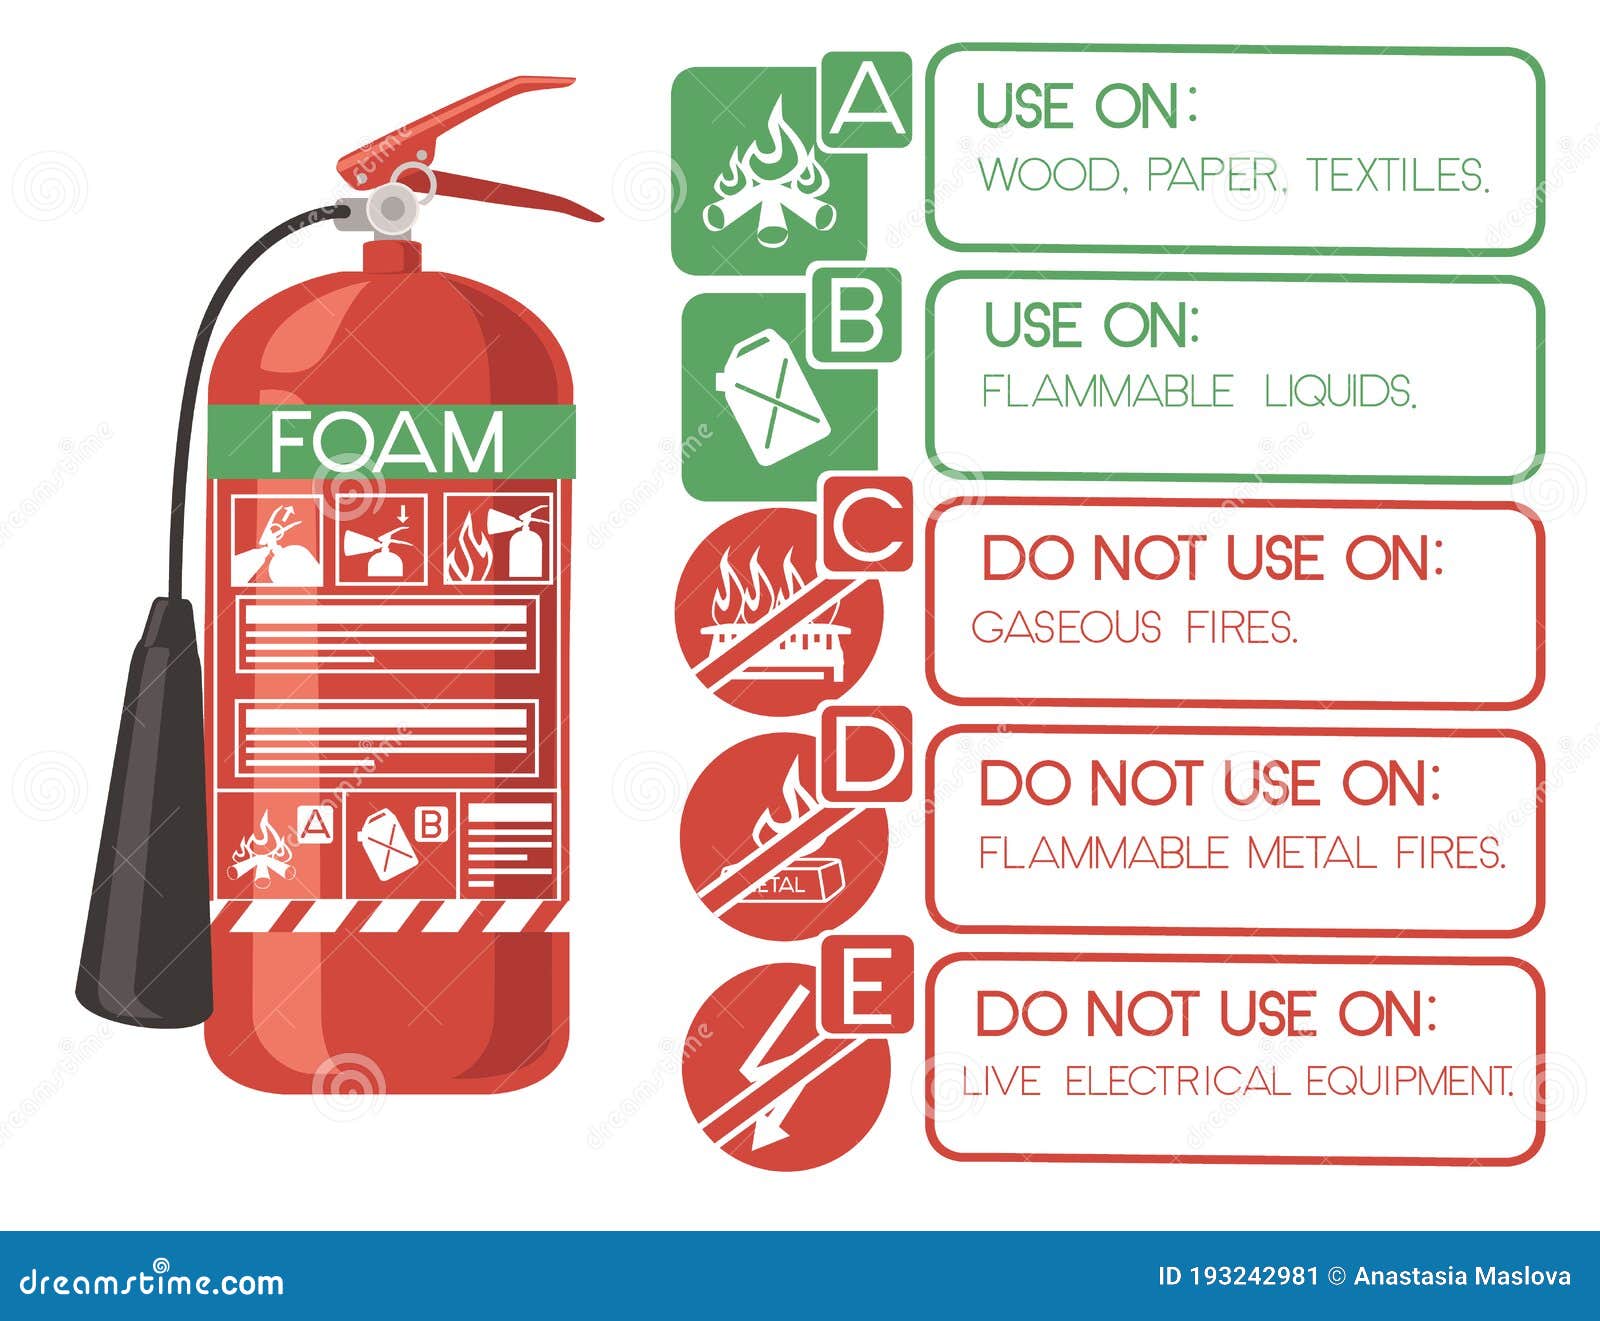 foam fire extinguisher with safe labels simple tips how to use icons flat   on white background